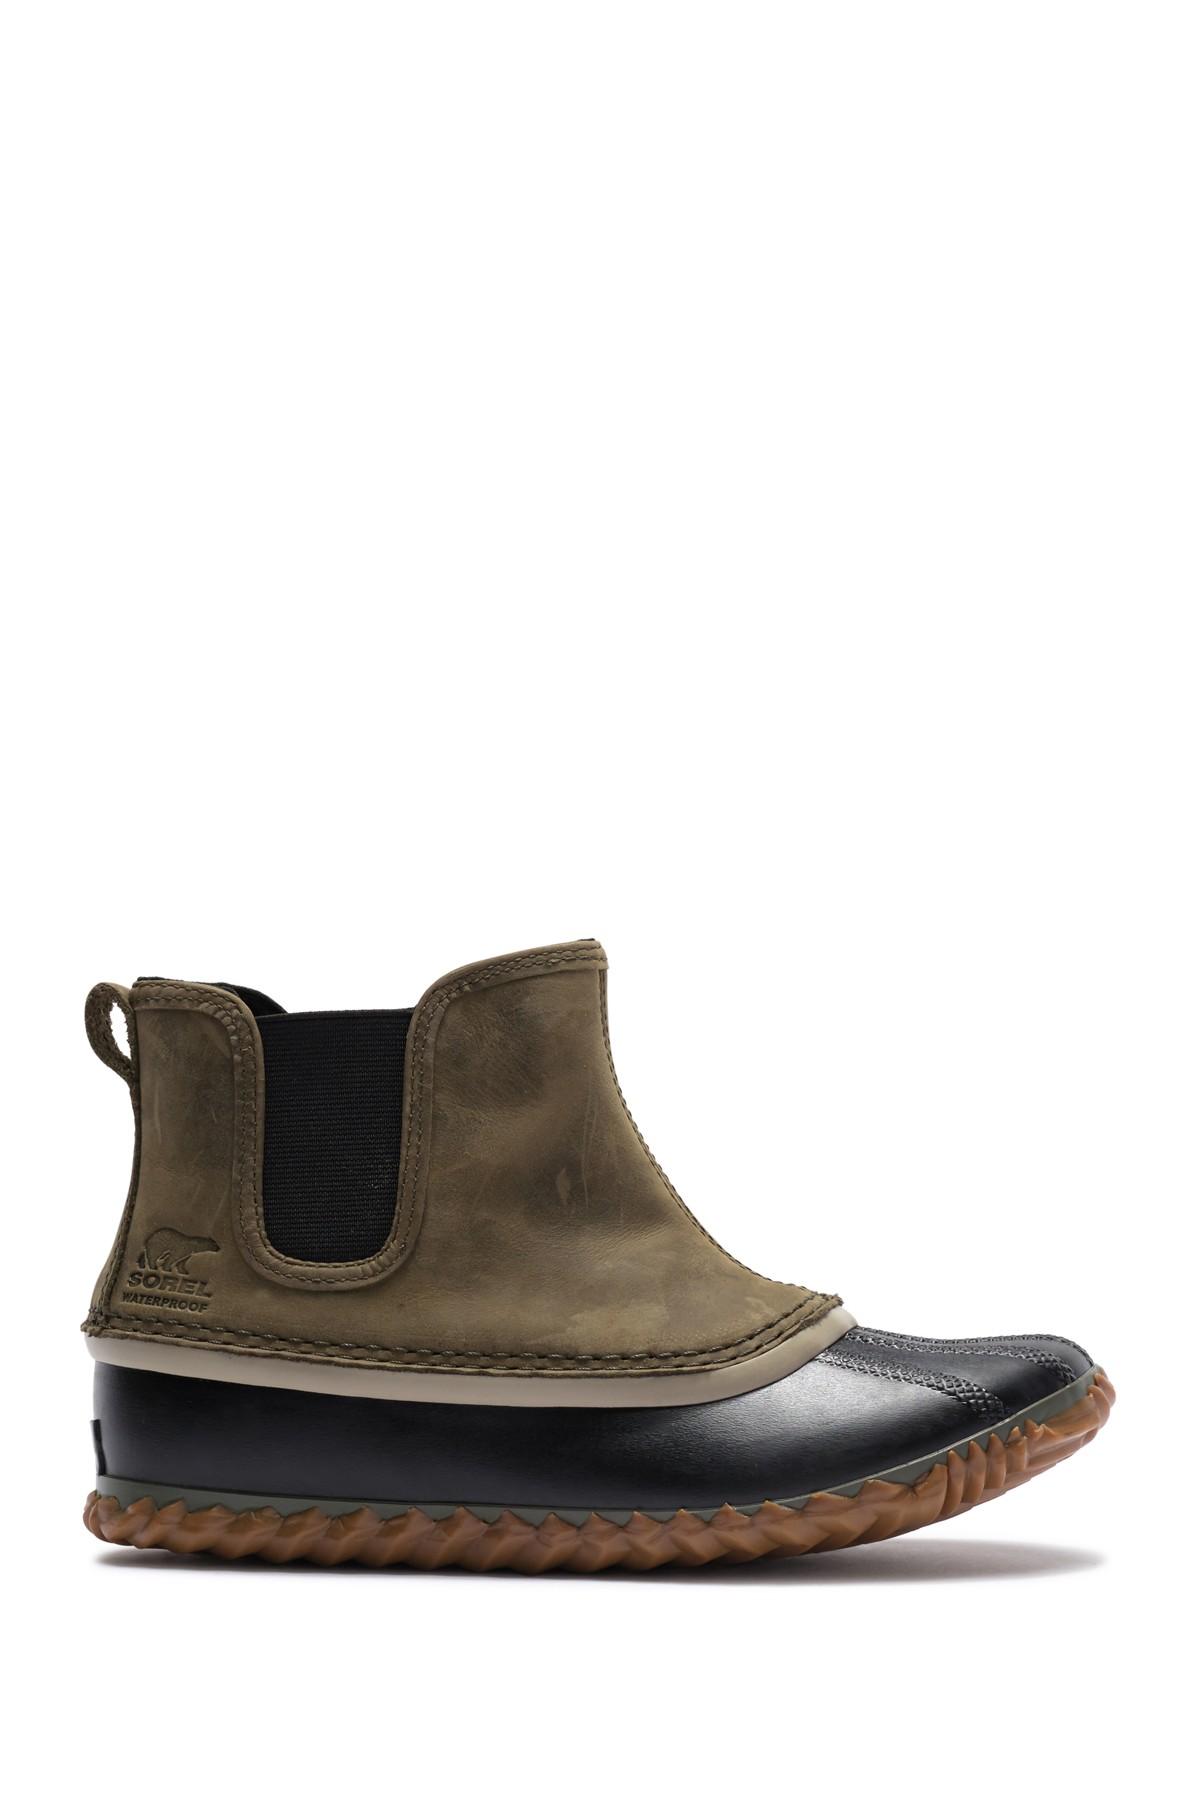 Sorel Leather Out N About Waterproof Chelsea Duck Boot in Brown - Lyst